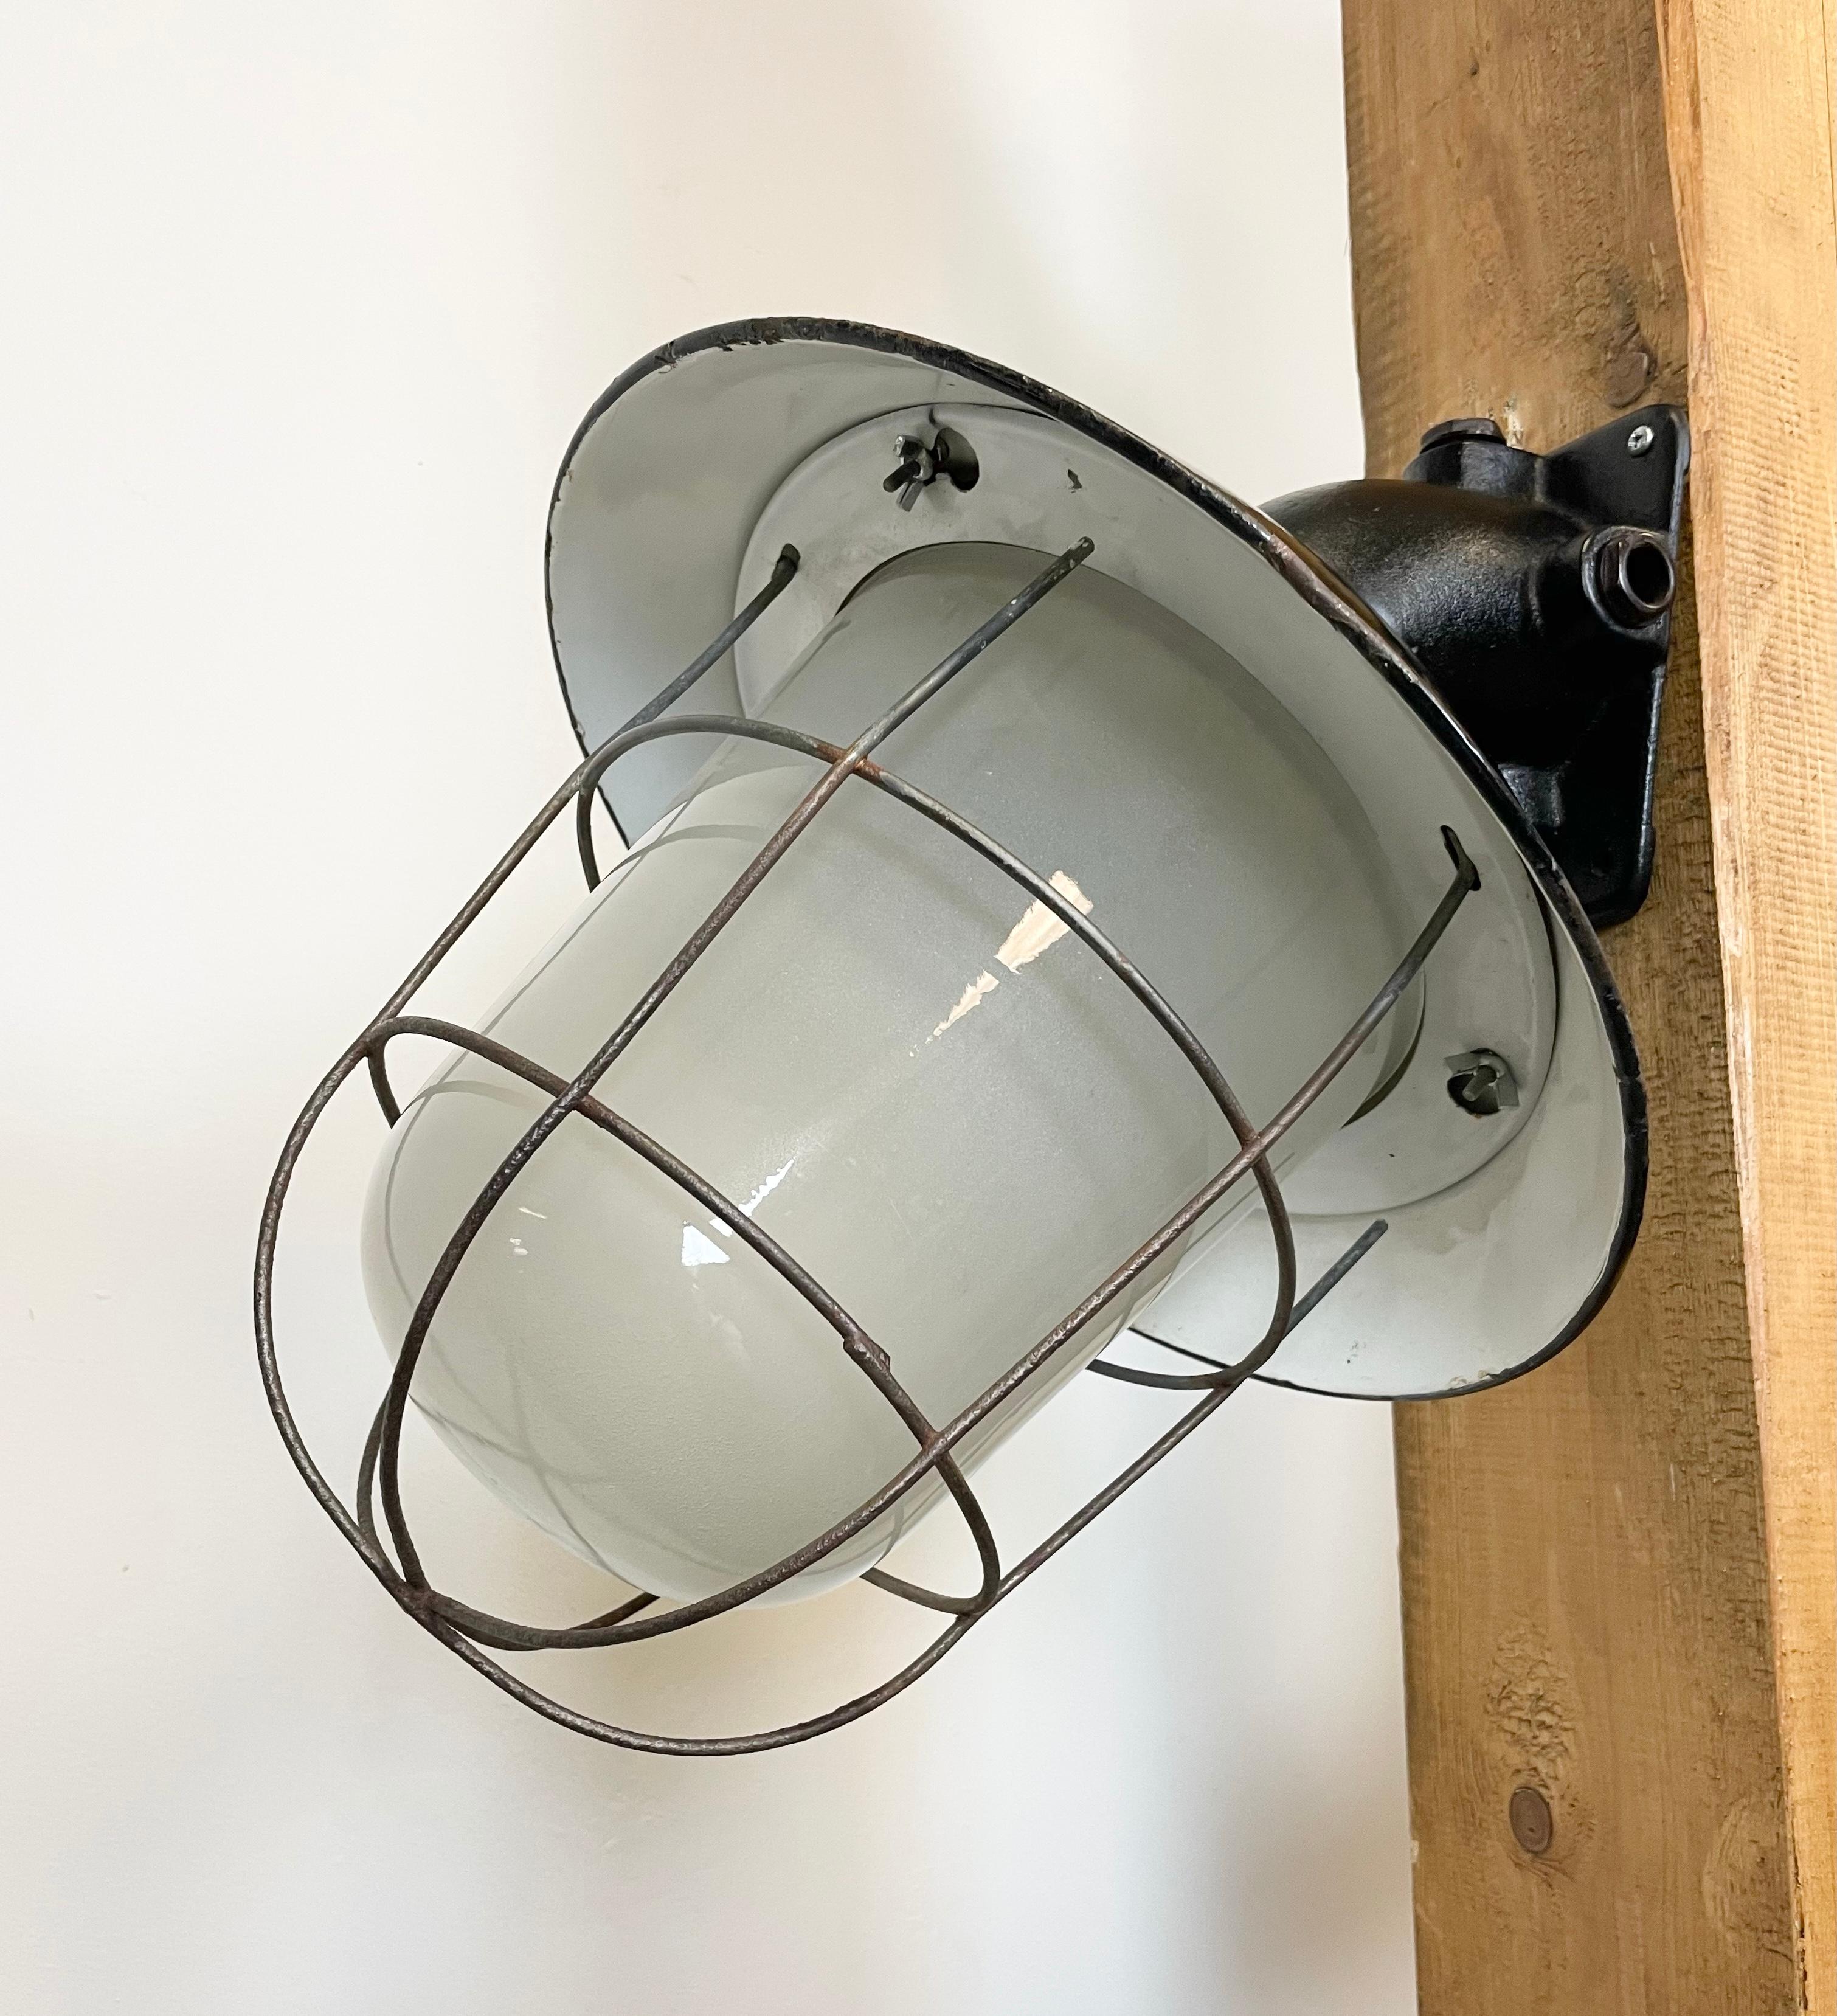 Czech Industrial Black Enamel and Cast Iron Wall Lamp with Iron Grid, 1960s For Sale